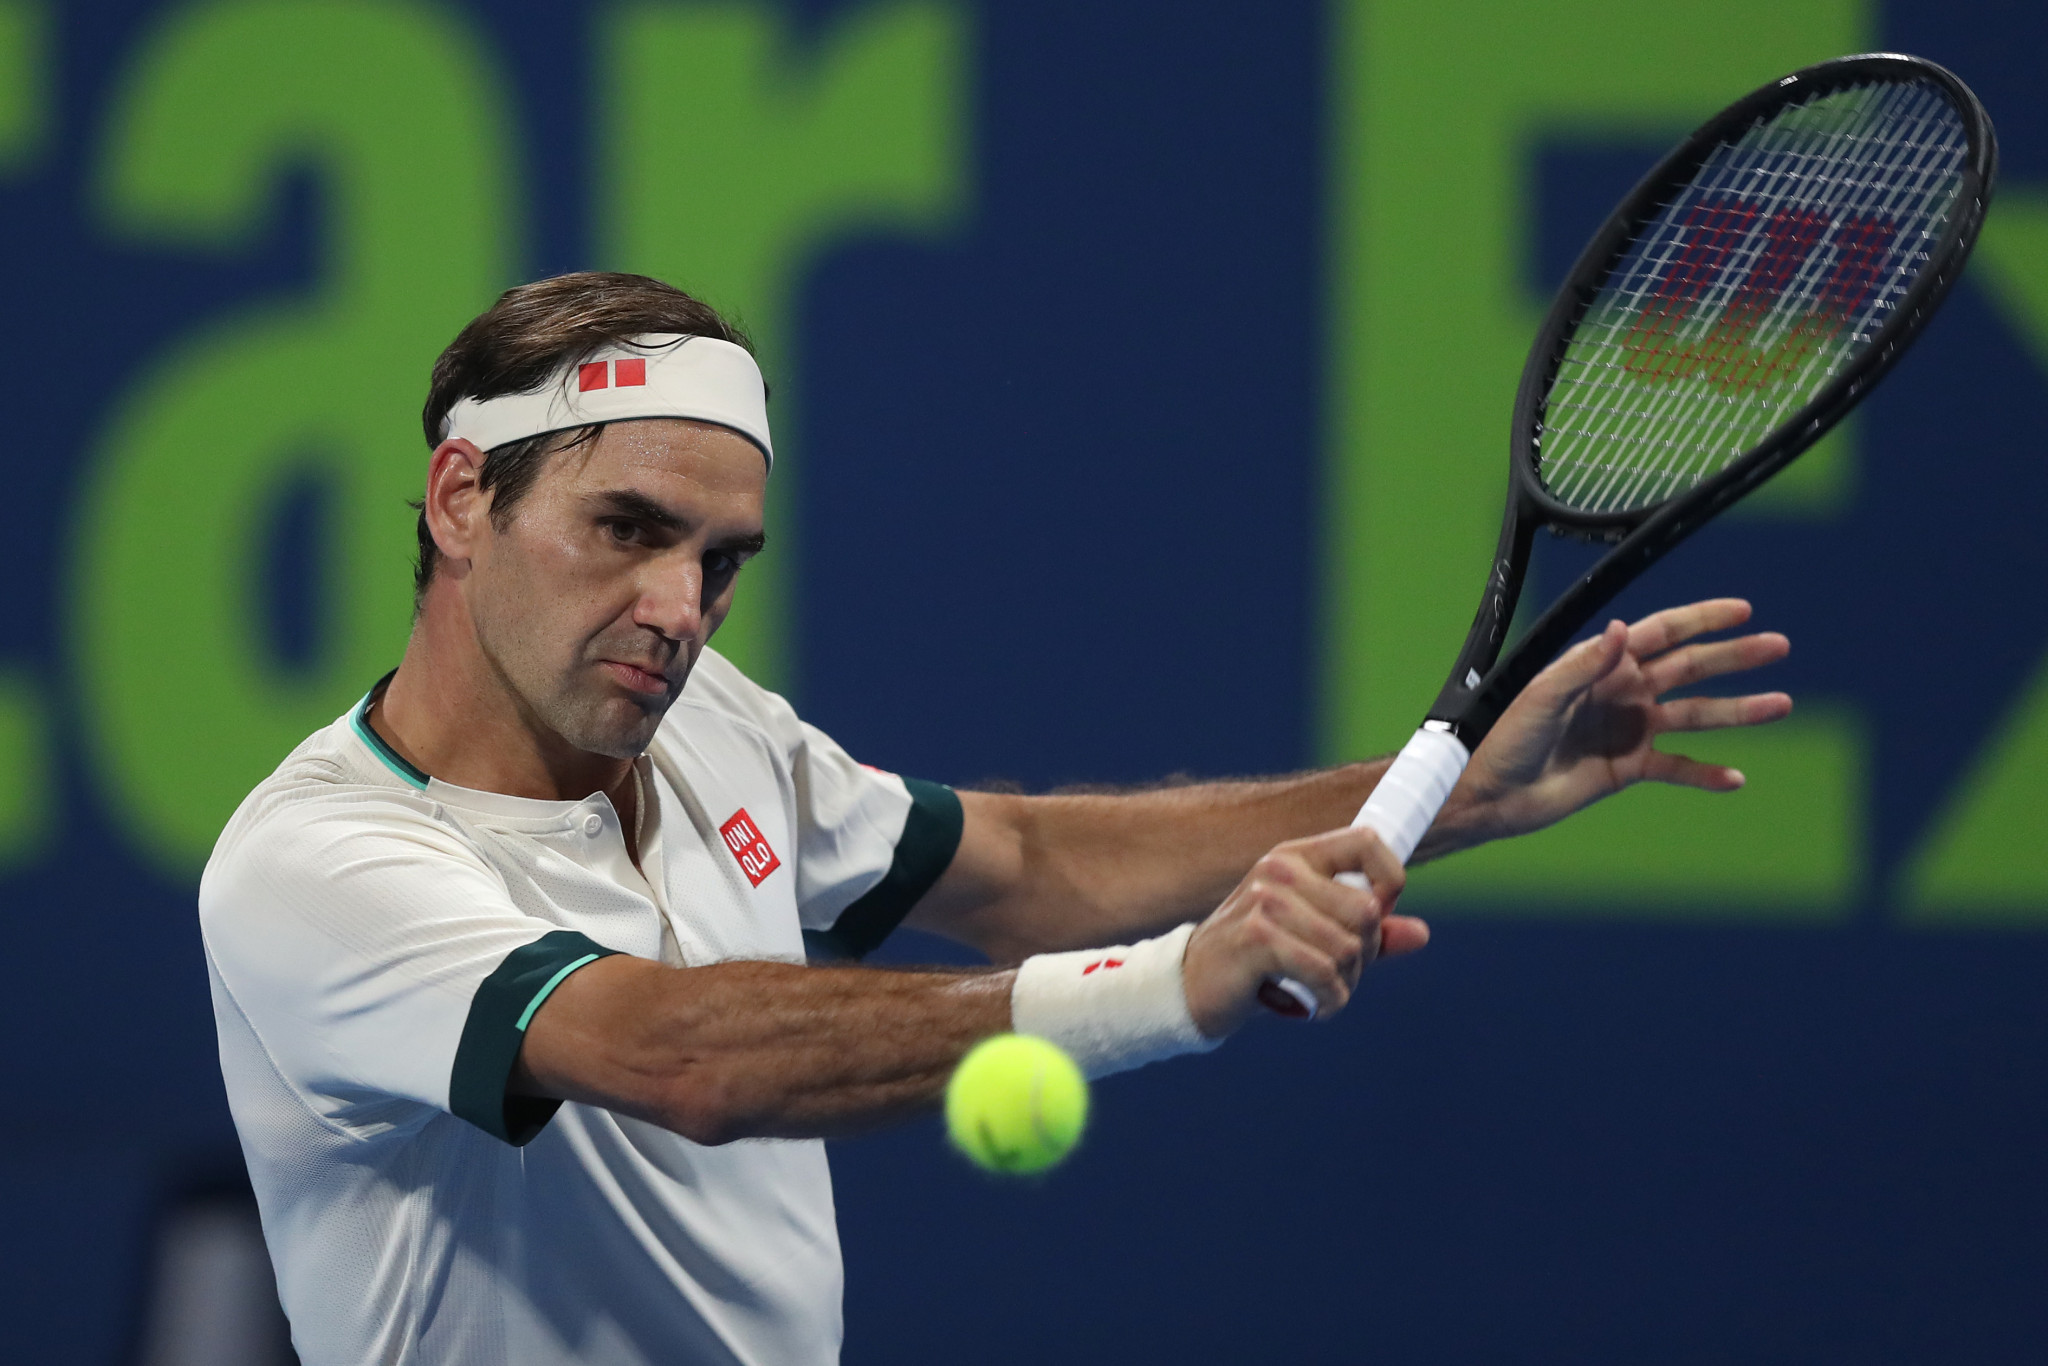 Federer insists athletes need Tokyo 2020 assurances to end uncertainty